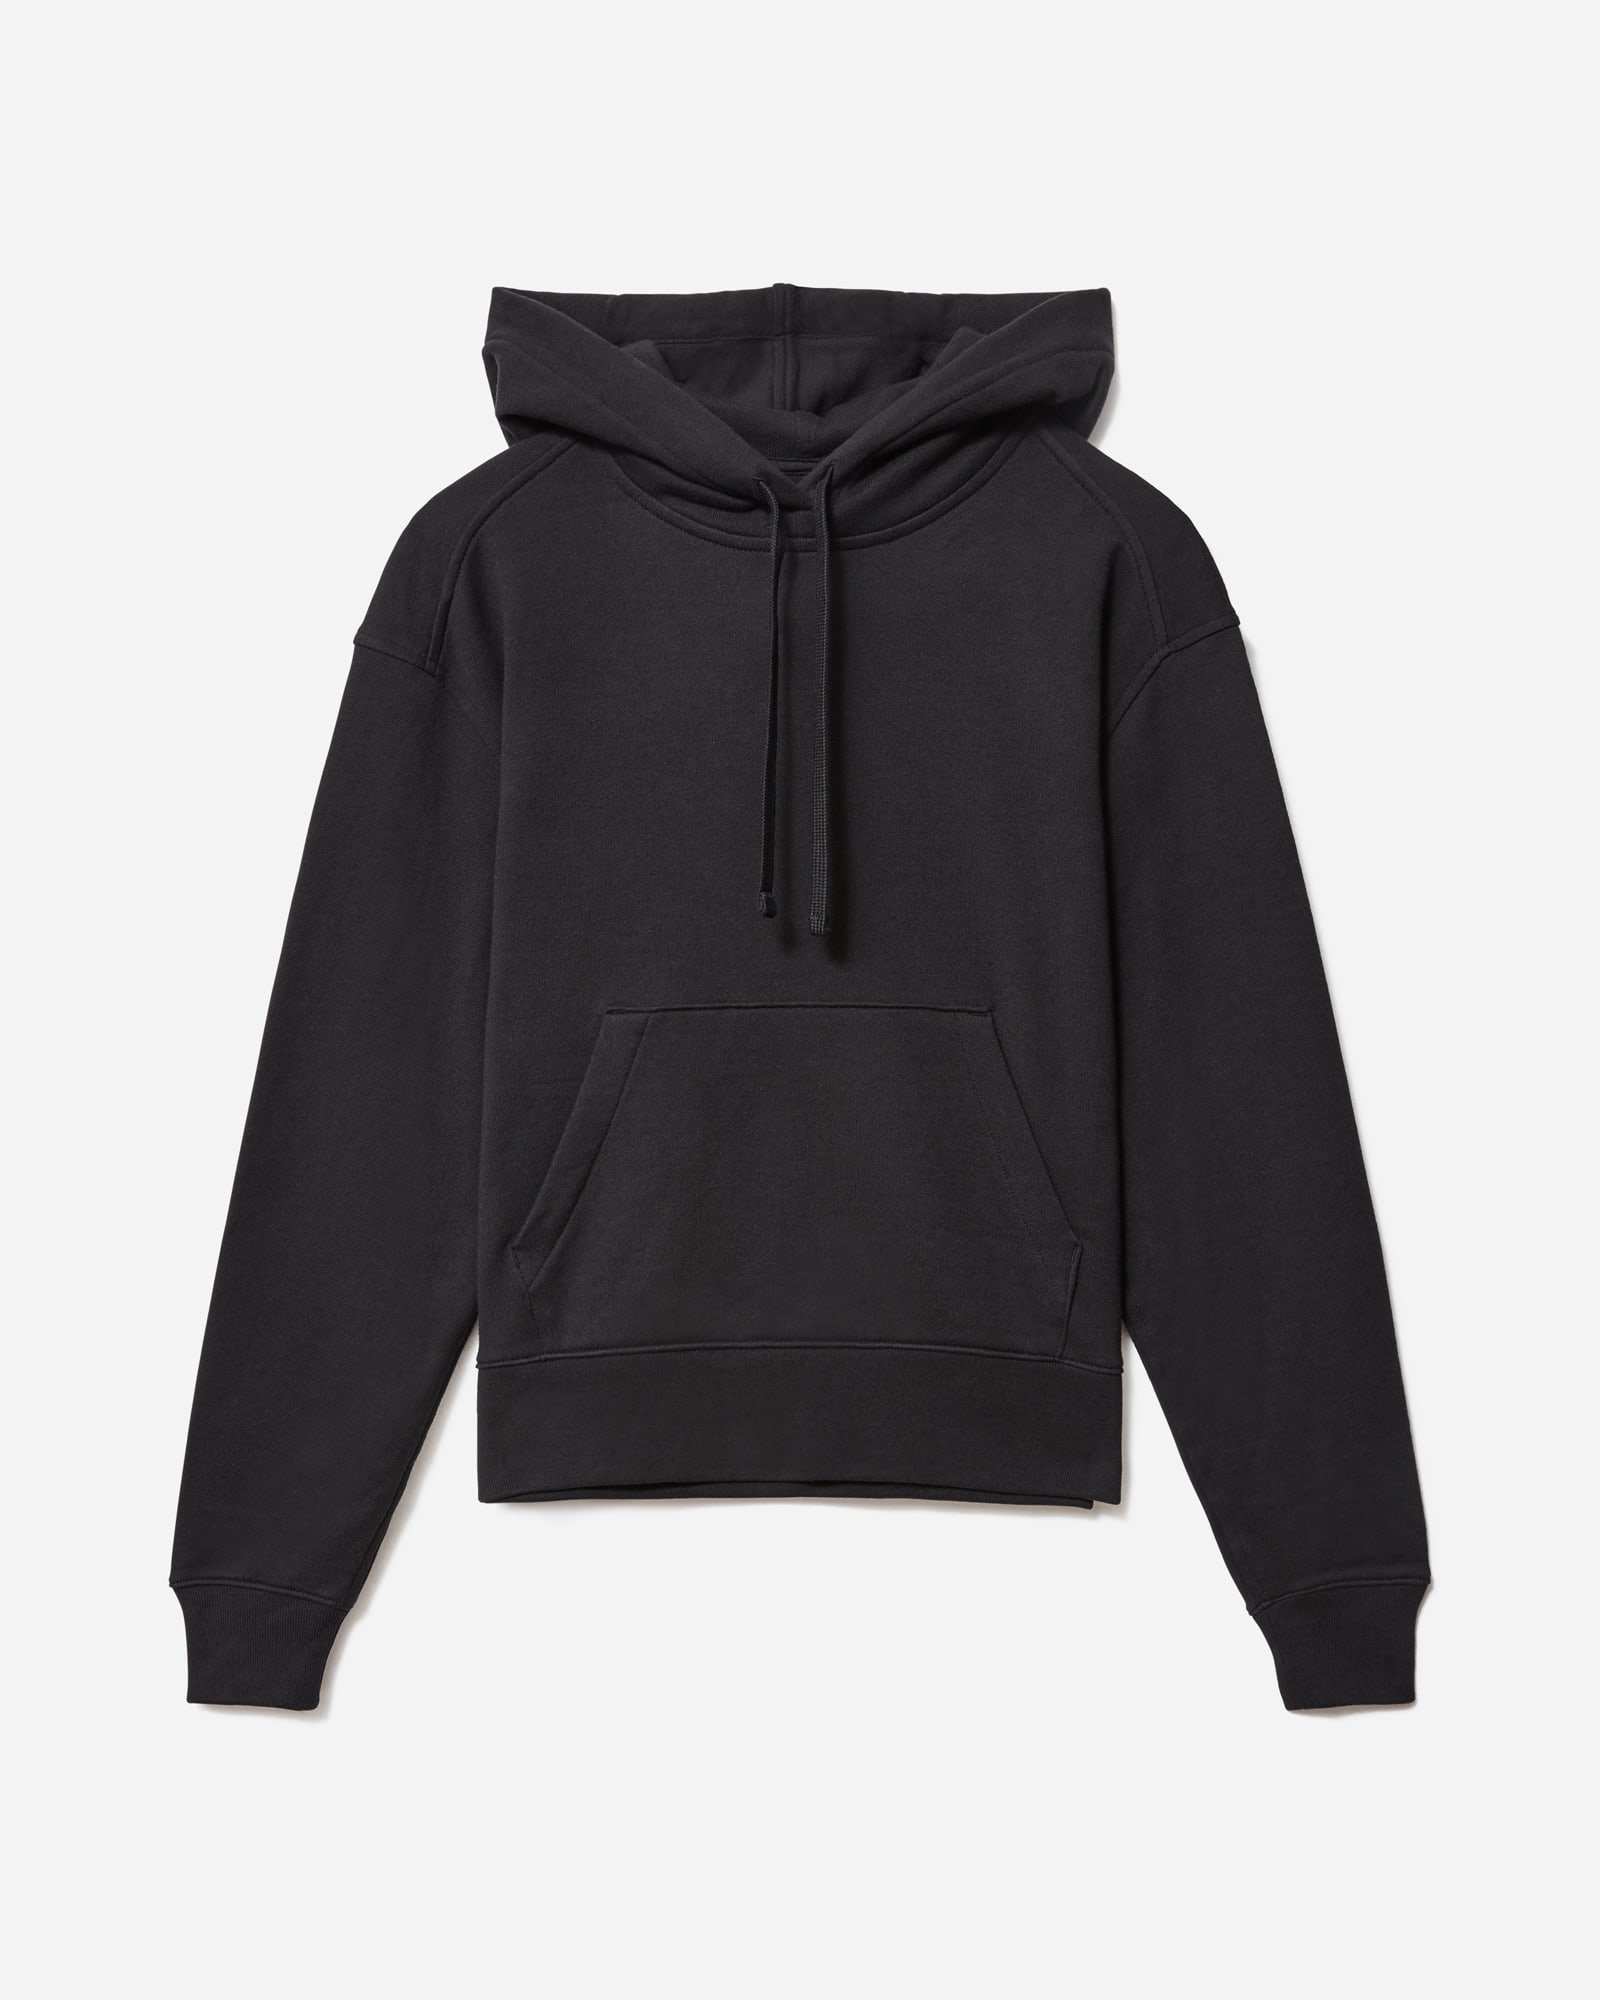 The Lightweight French Terry Hoodie Black – Everlane